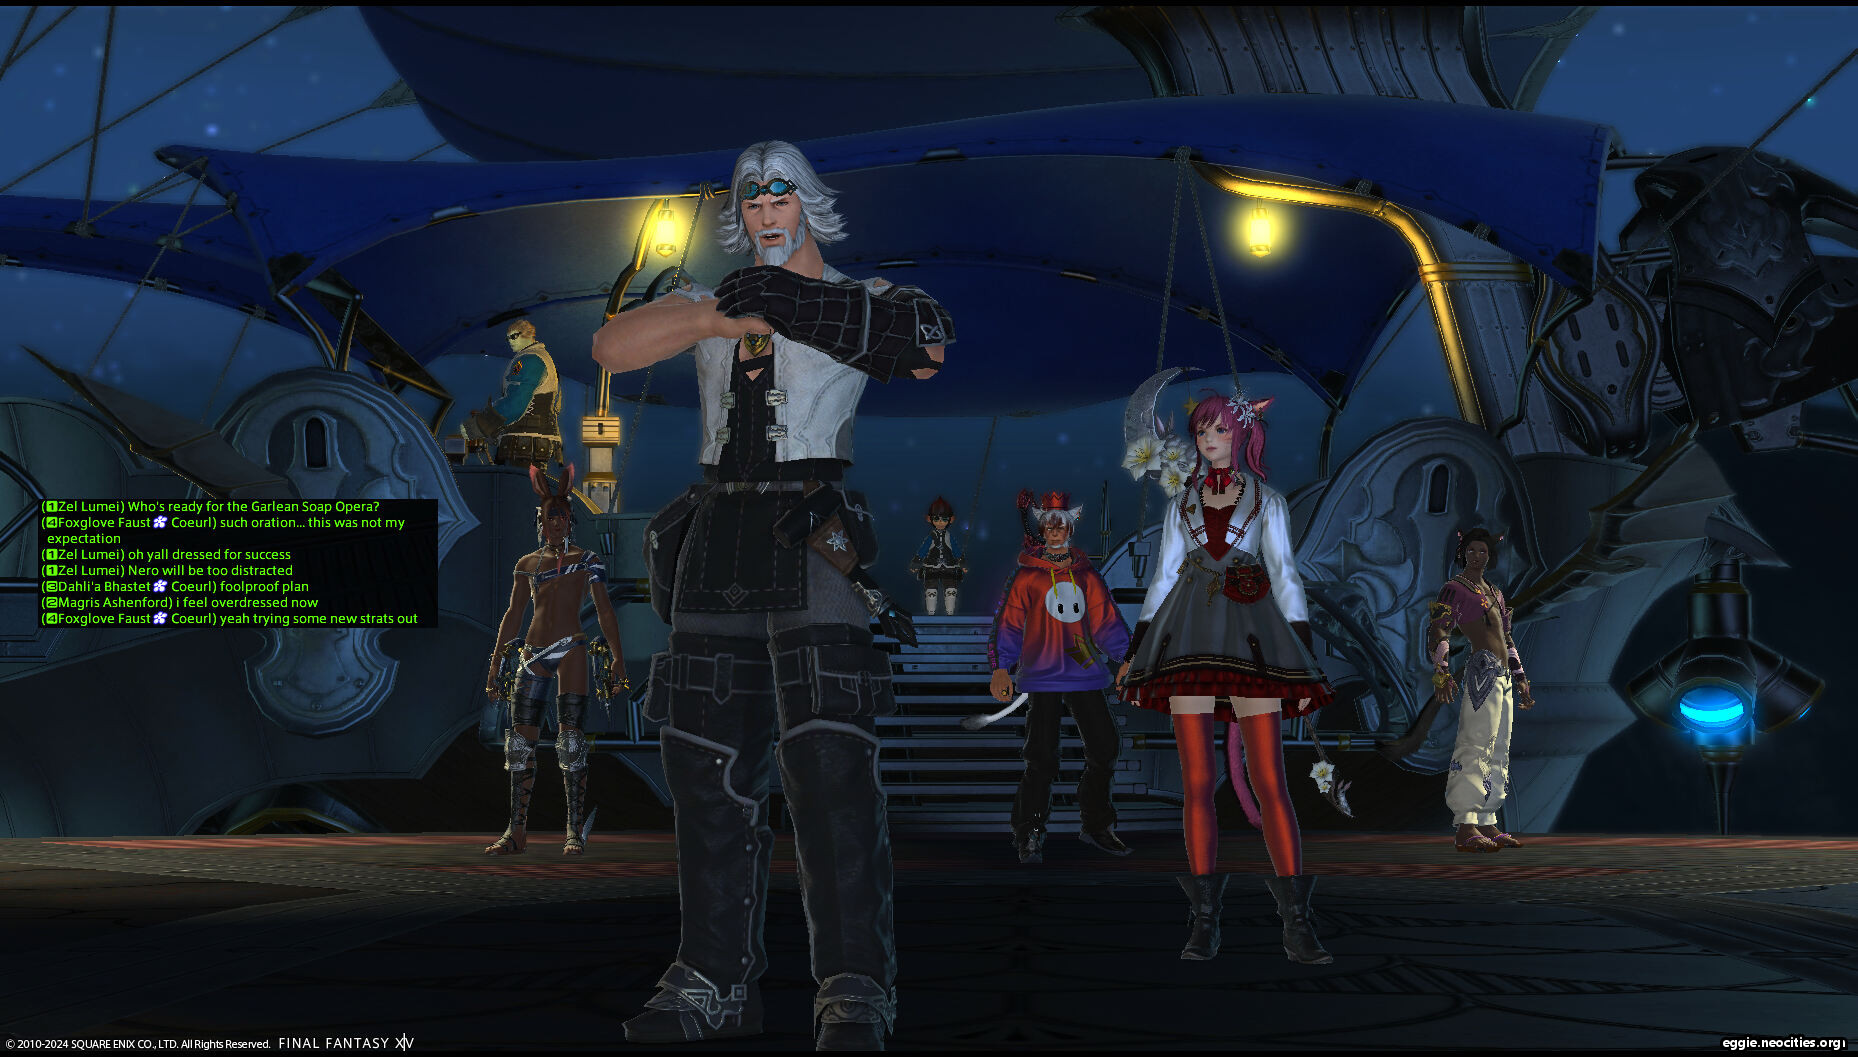 The opening cutscene for praetorium. The two PUGs are very scantily clad. There is a dialogue box overlaid
                                    Zel Lumei: Who's ready for the garlean soap opera?
									Foxglove Faust: such oration...this was not my expectation
									Zel Lumei: oh yall dressed for success. Nero will be too distracted.
									Dahli'a Bhastet: Foolproof plan.
									Magris Ashenford: i feel overdressed now.
									Foxglove Faust: Yeah trying some new strats out